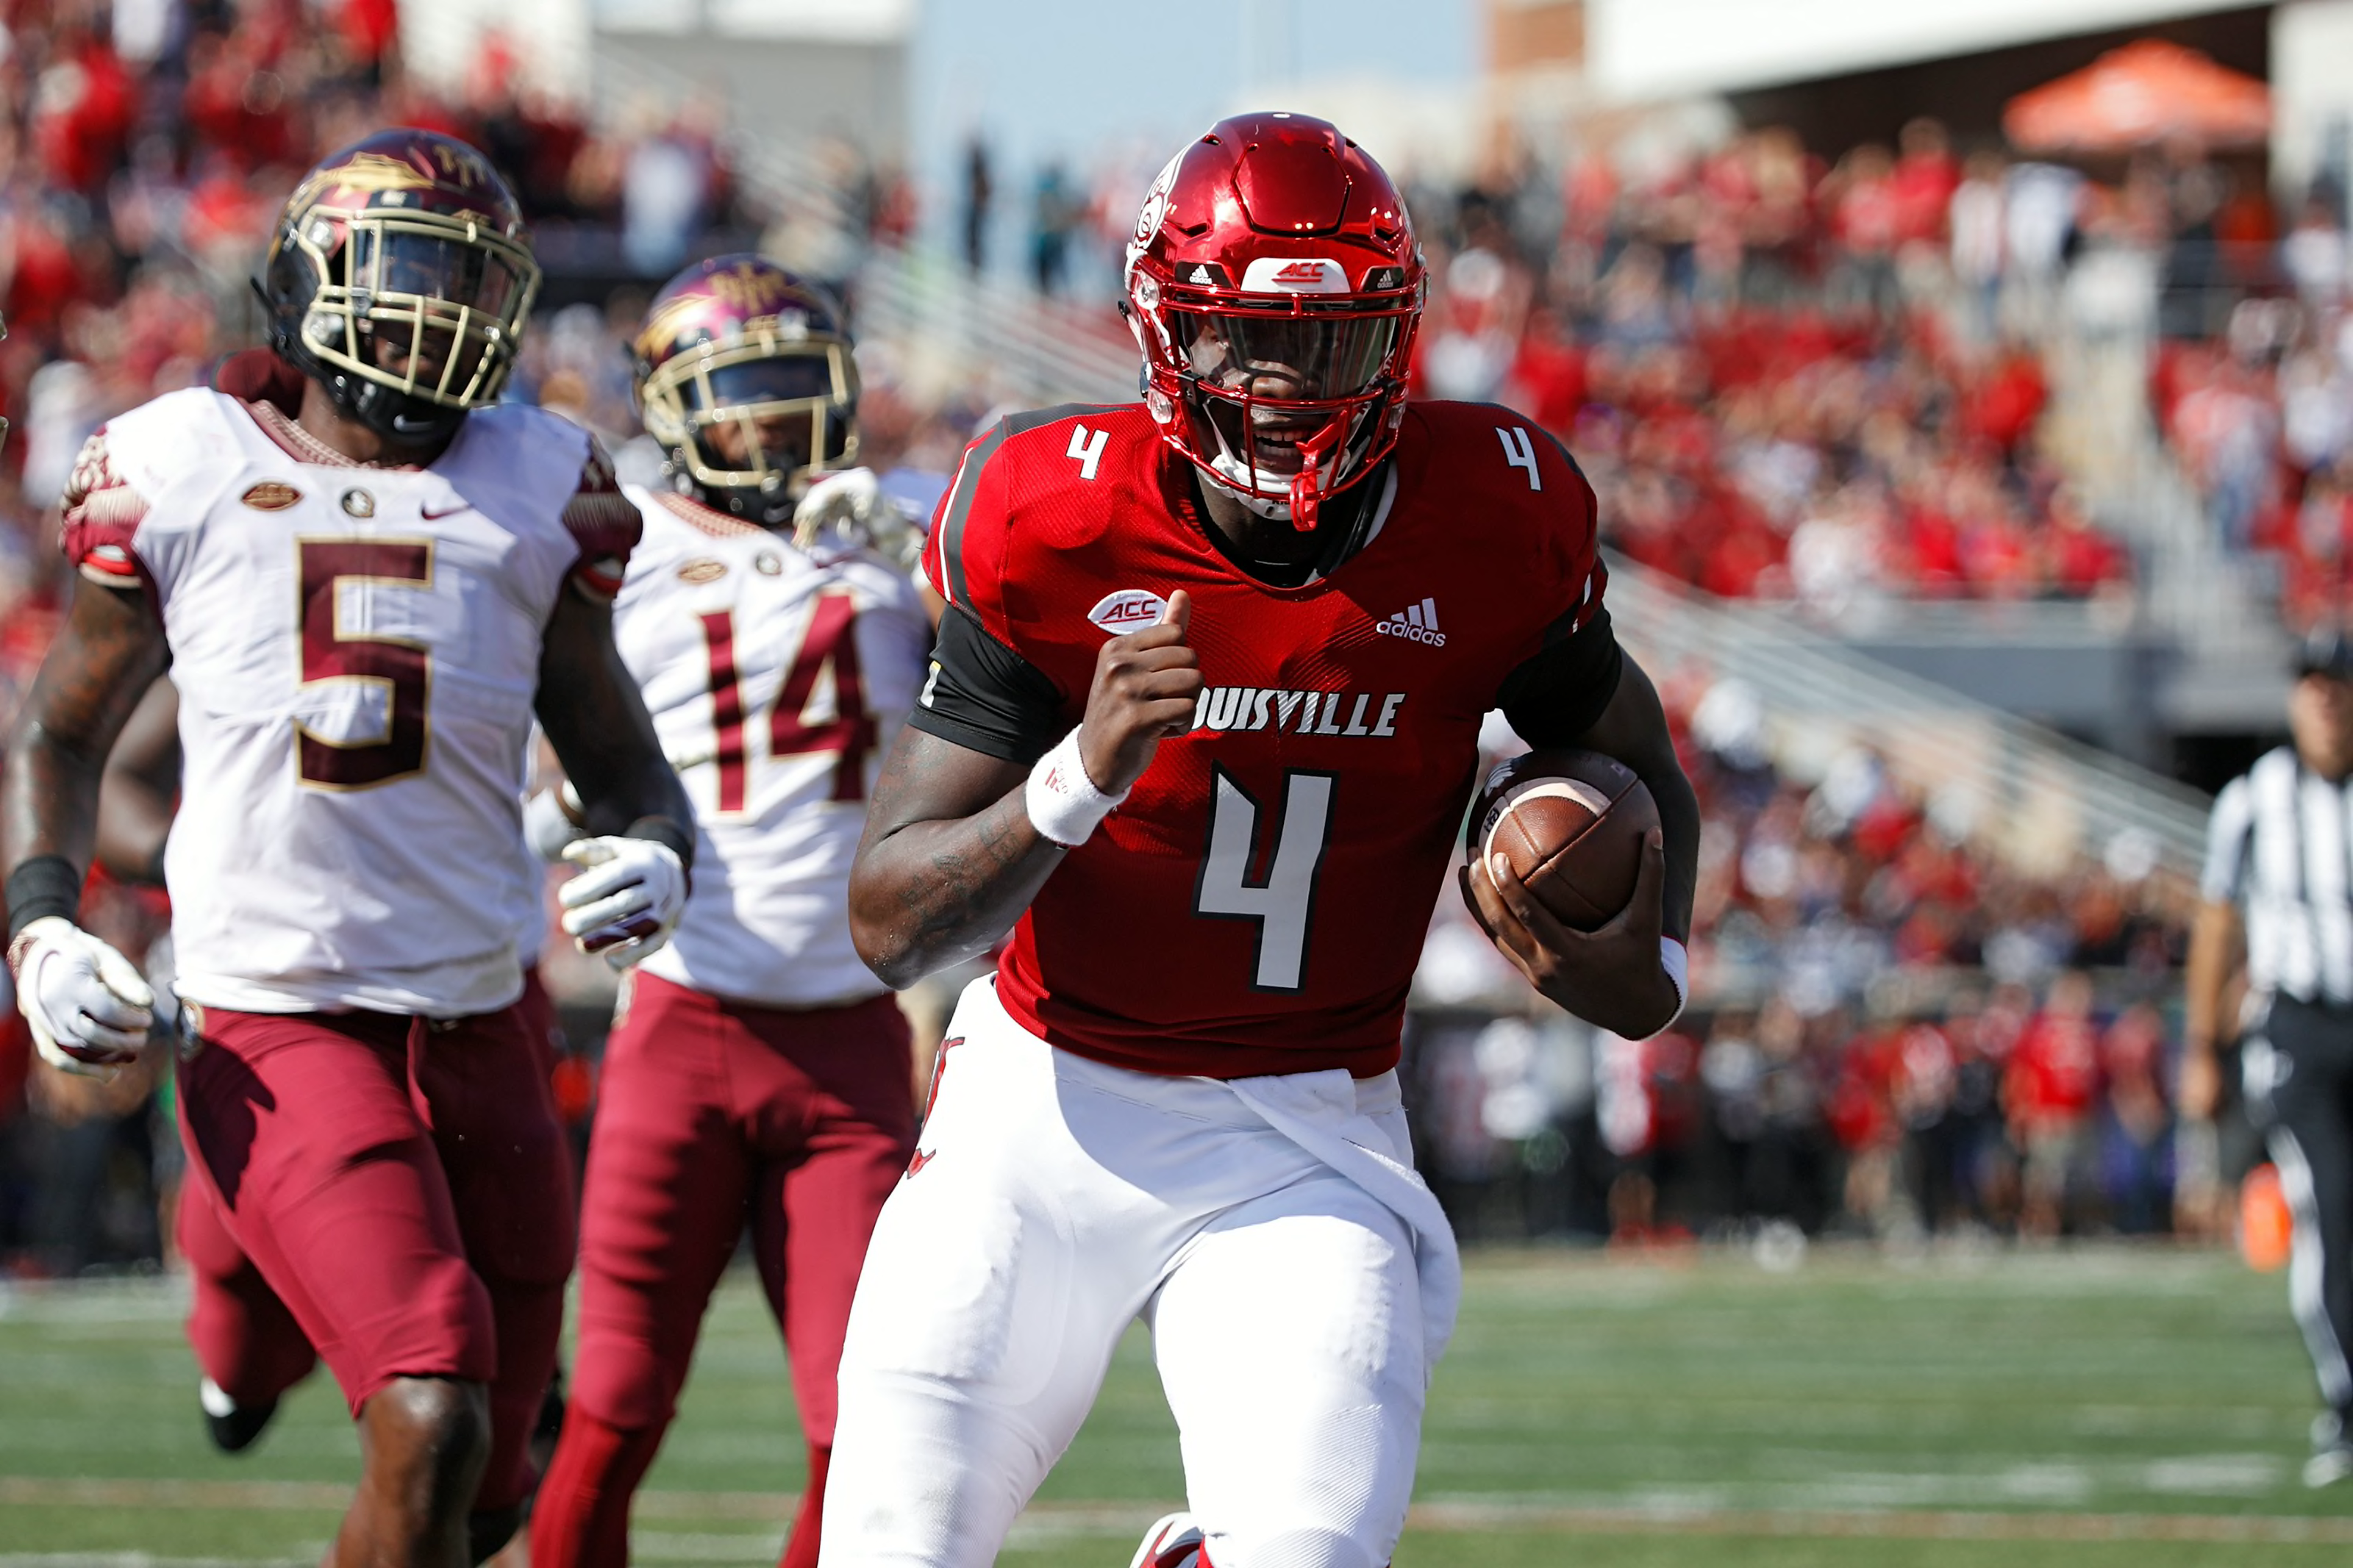 Louisville football 2019 depth chart preview: Quarterback - Page 3